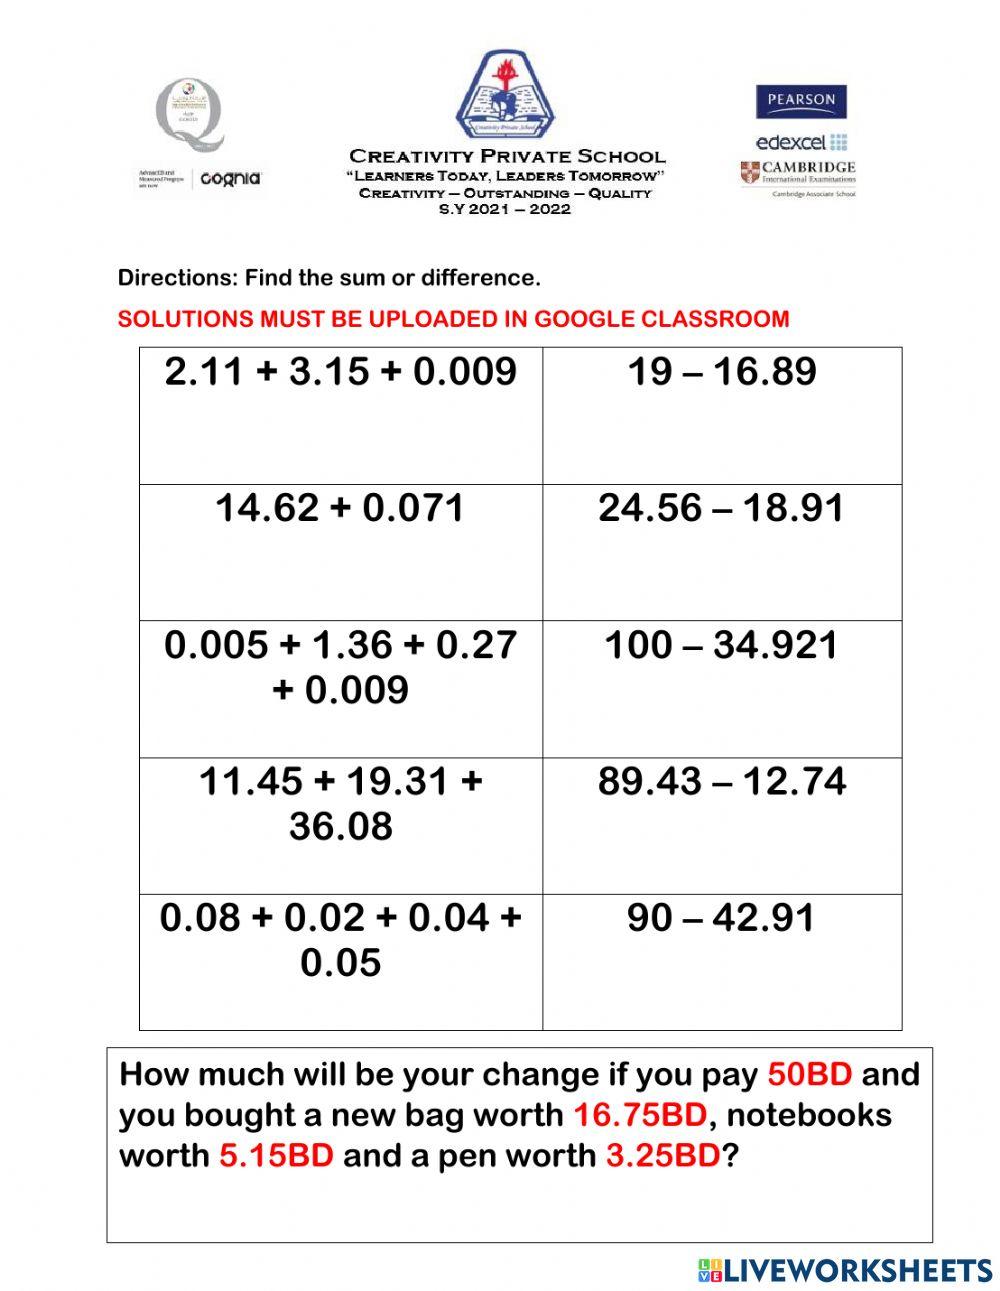 Addition and Subtraction of Decimals